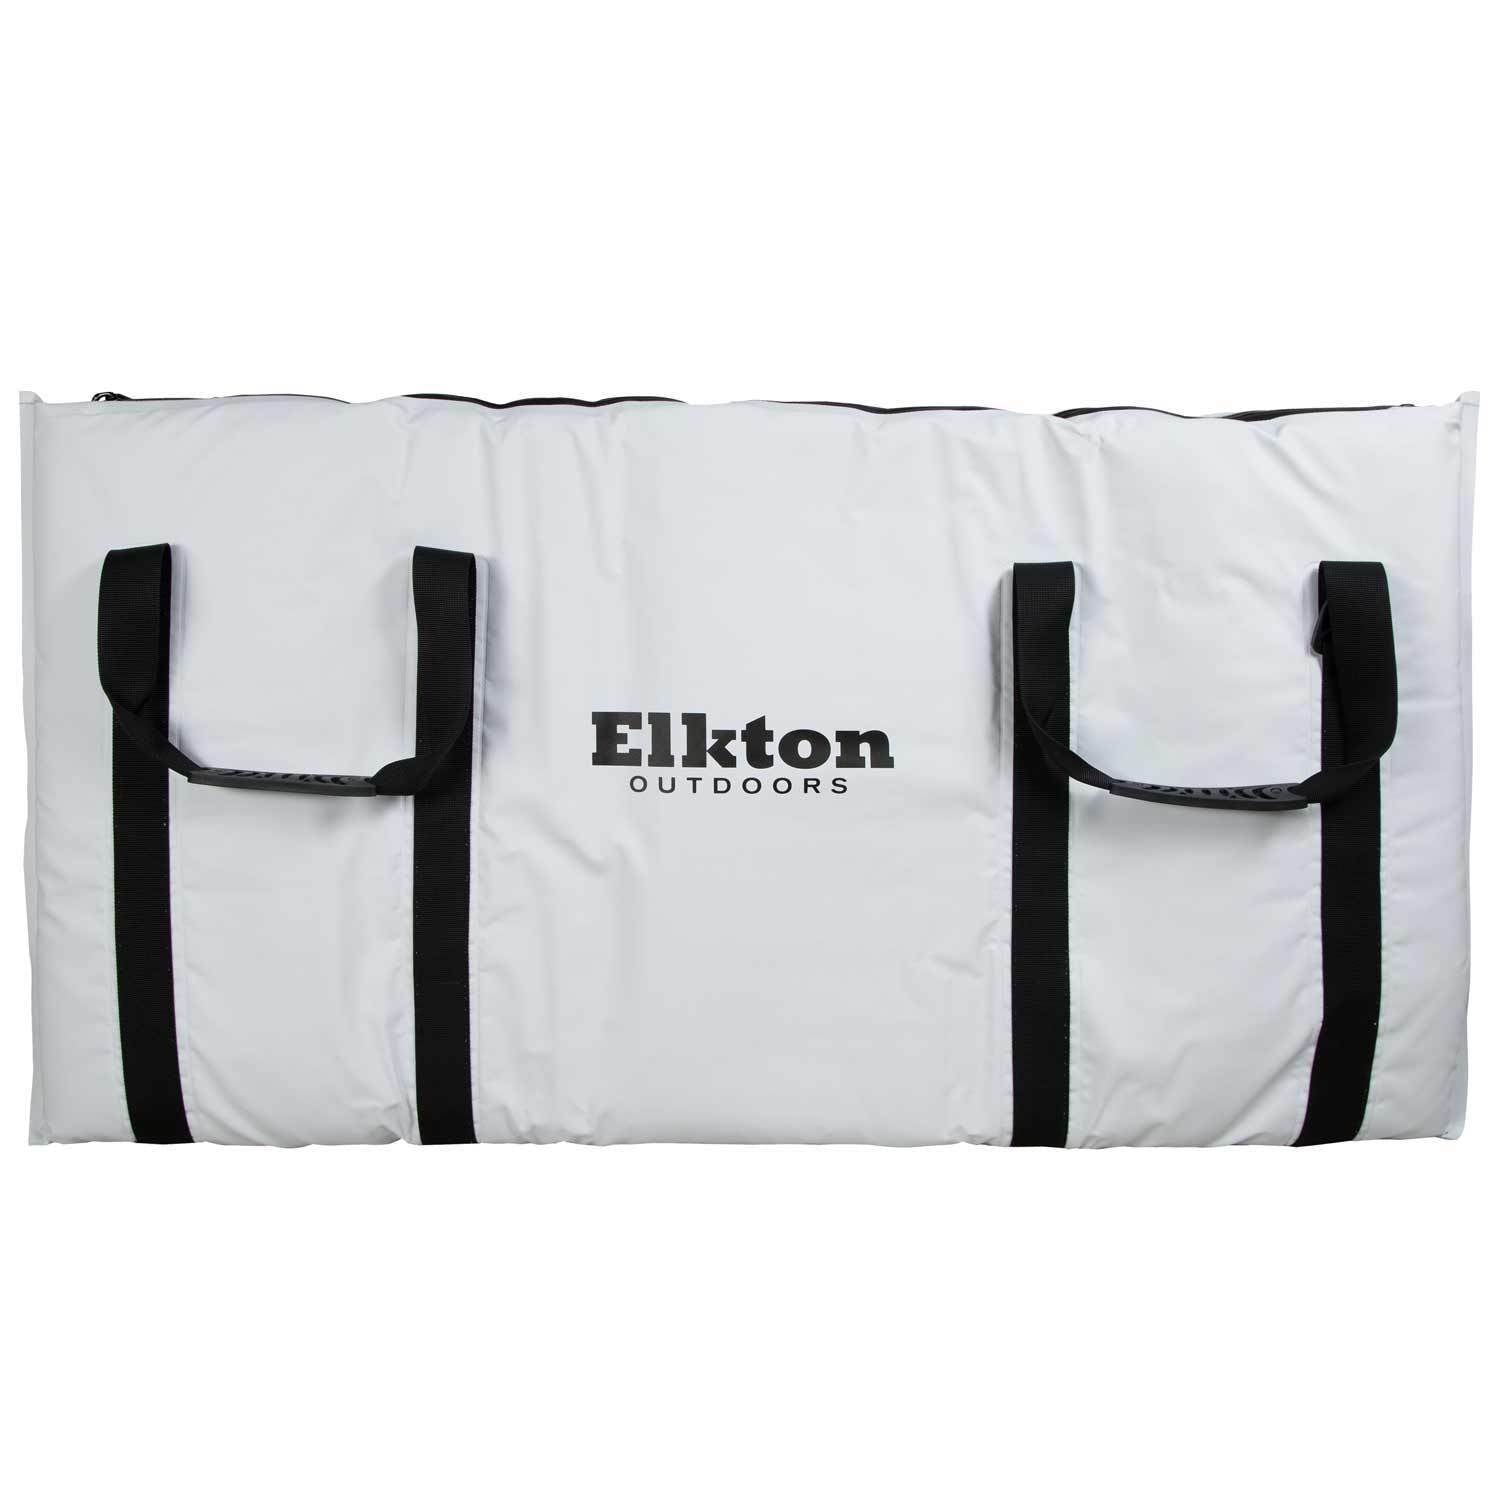 Elkton Outdoors Insulated Fish Cooler Bag with Easy Grip Carry Handles and Carry